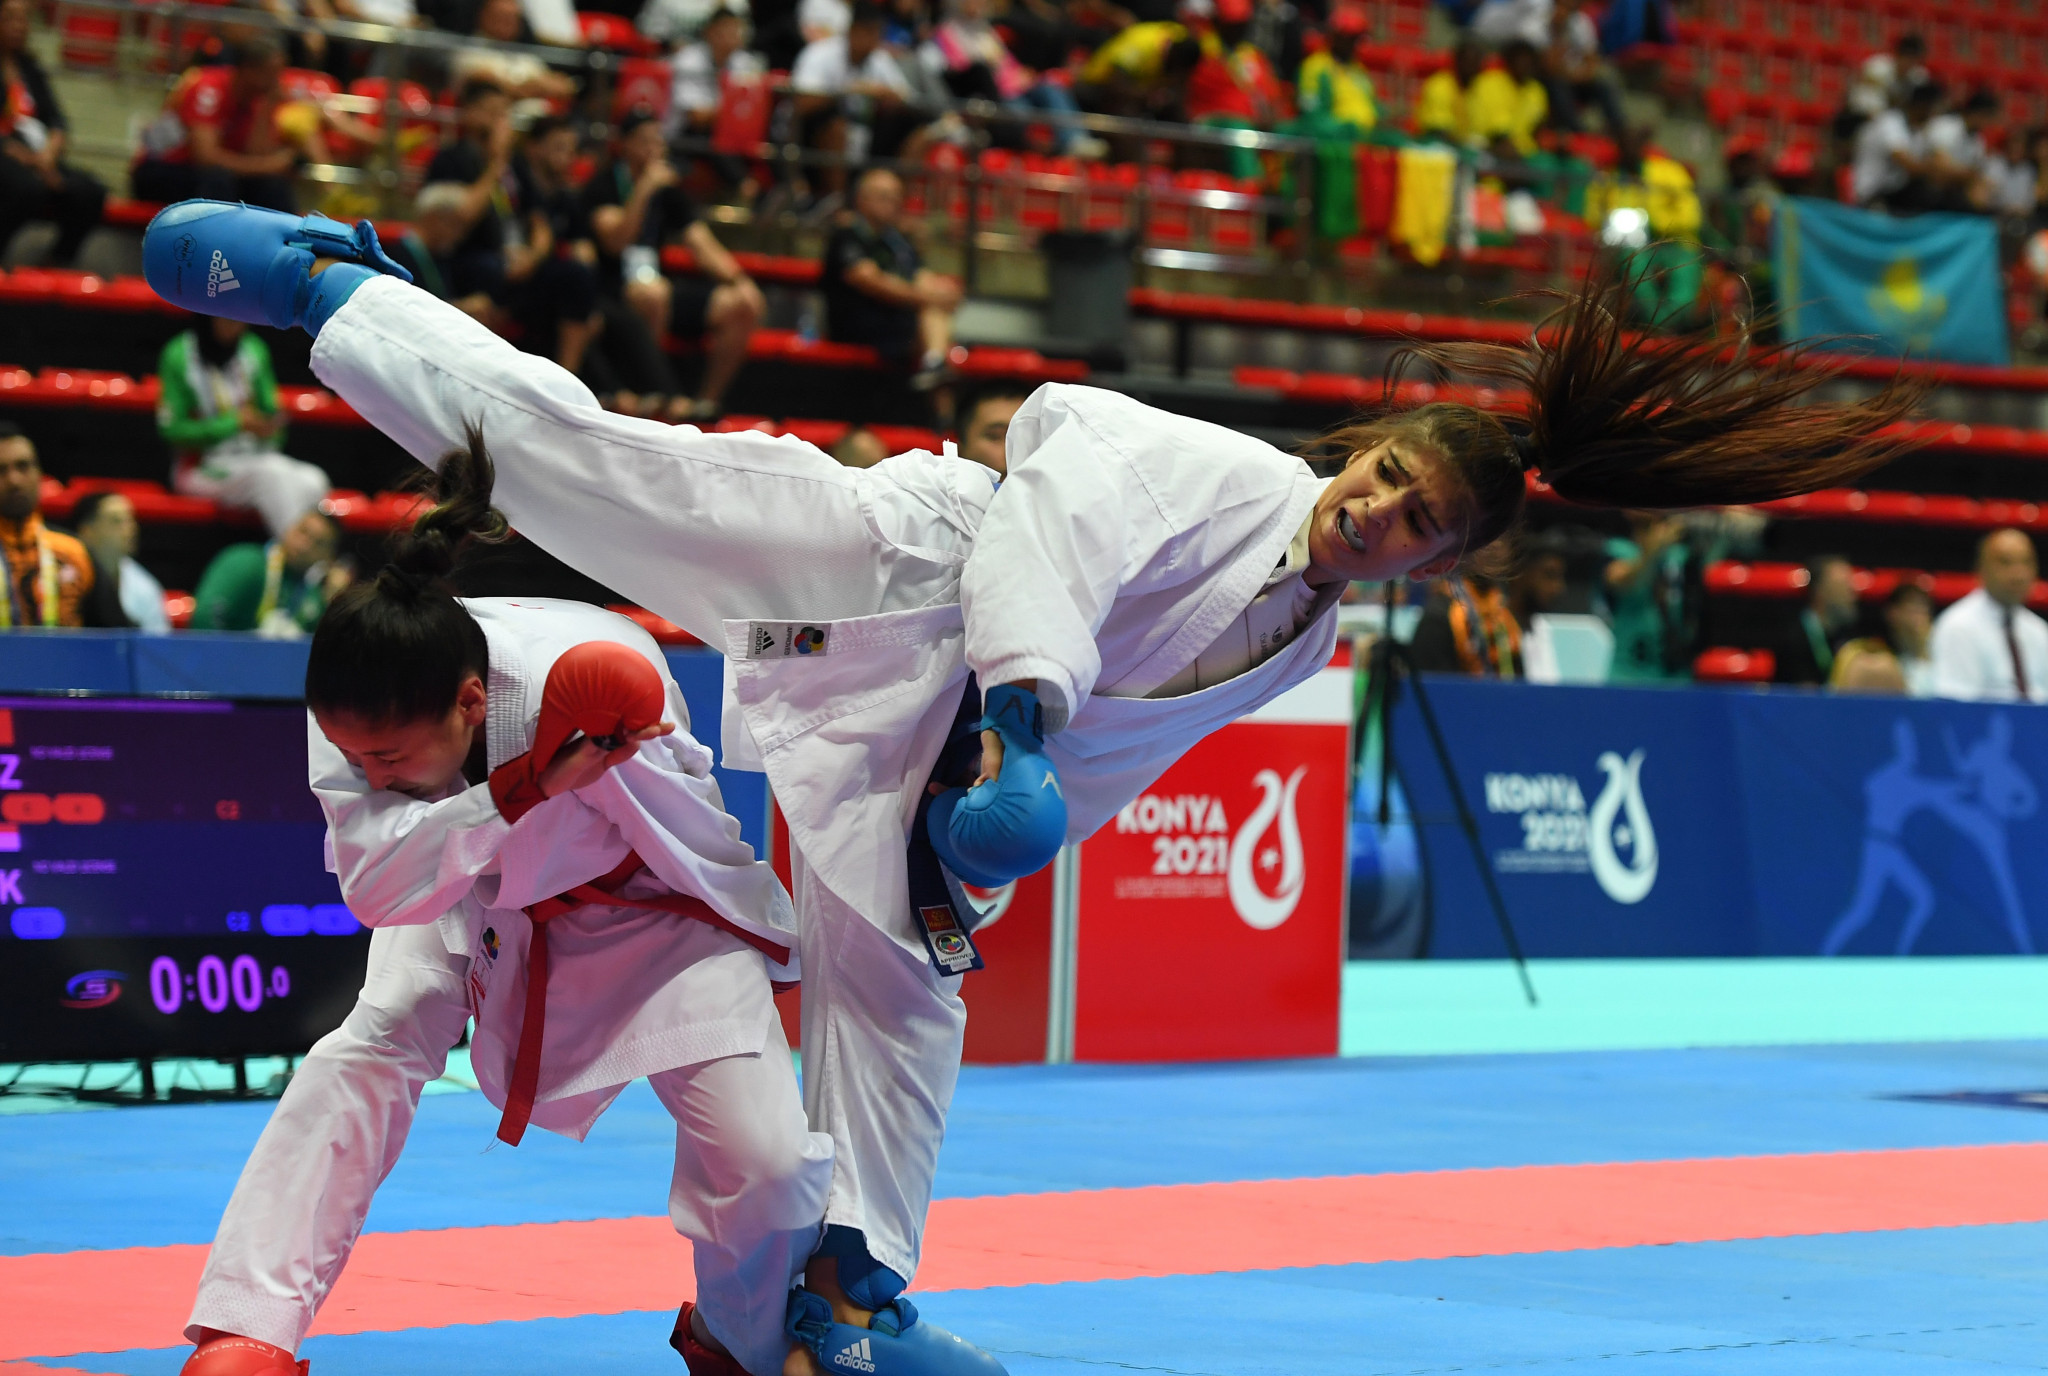 There were plenty of impressive performances at the final karate session, which was delayed due to technical issues ©Konya 2021